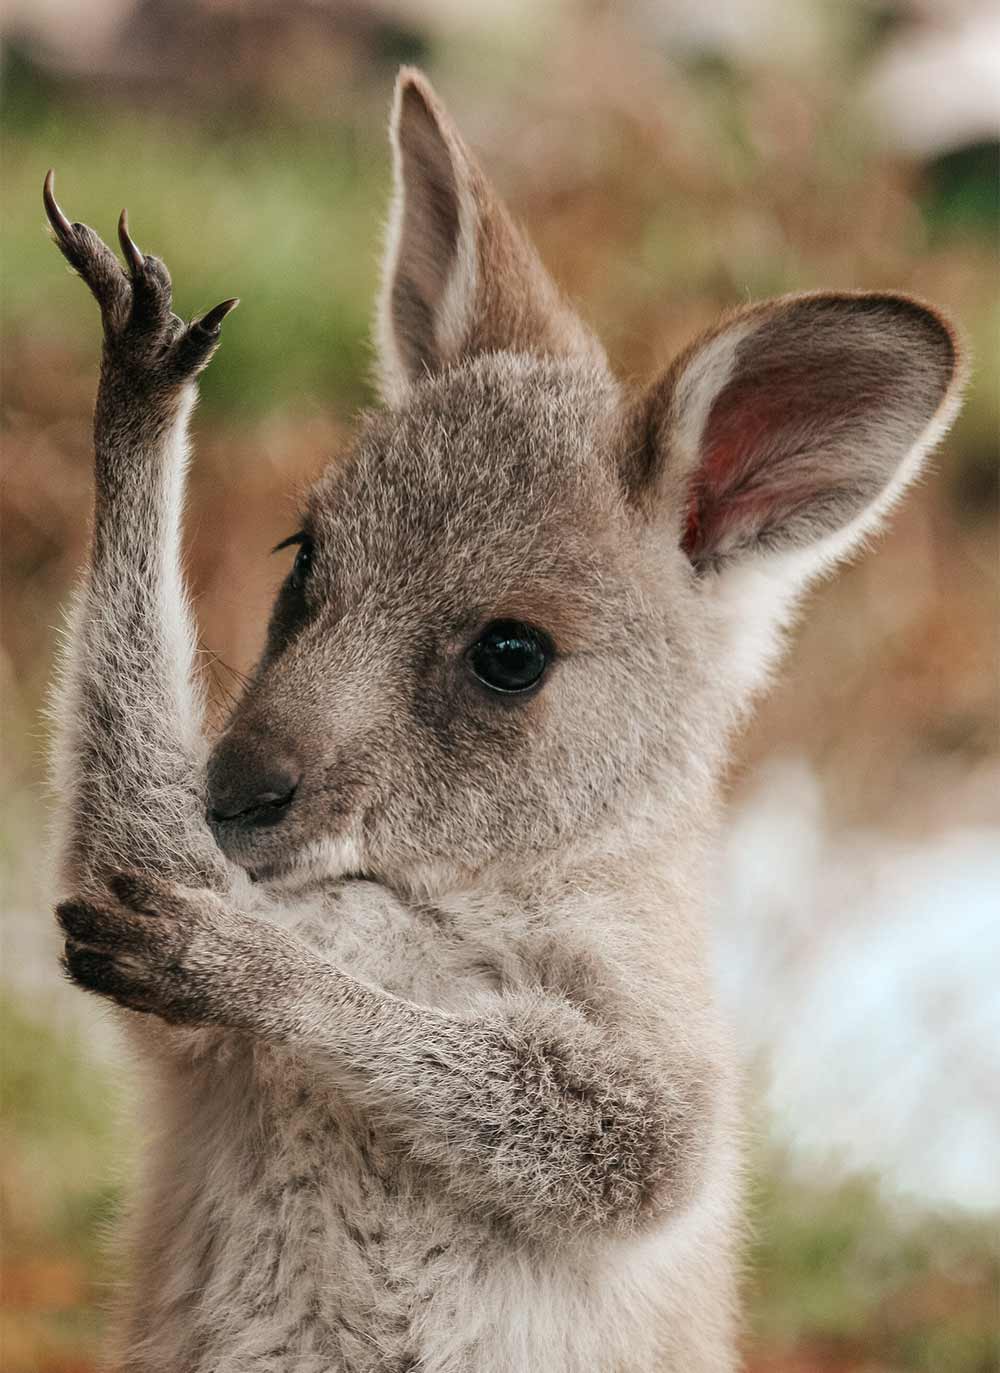 A cute baby kangaroo holding their arms up